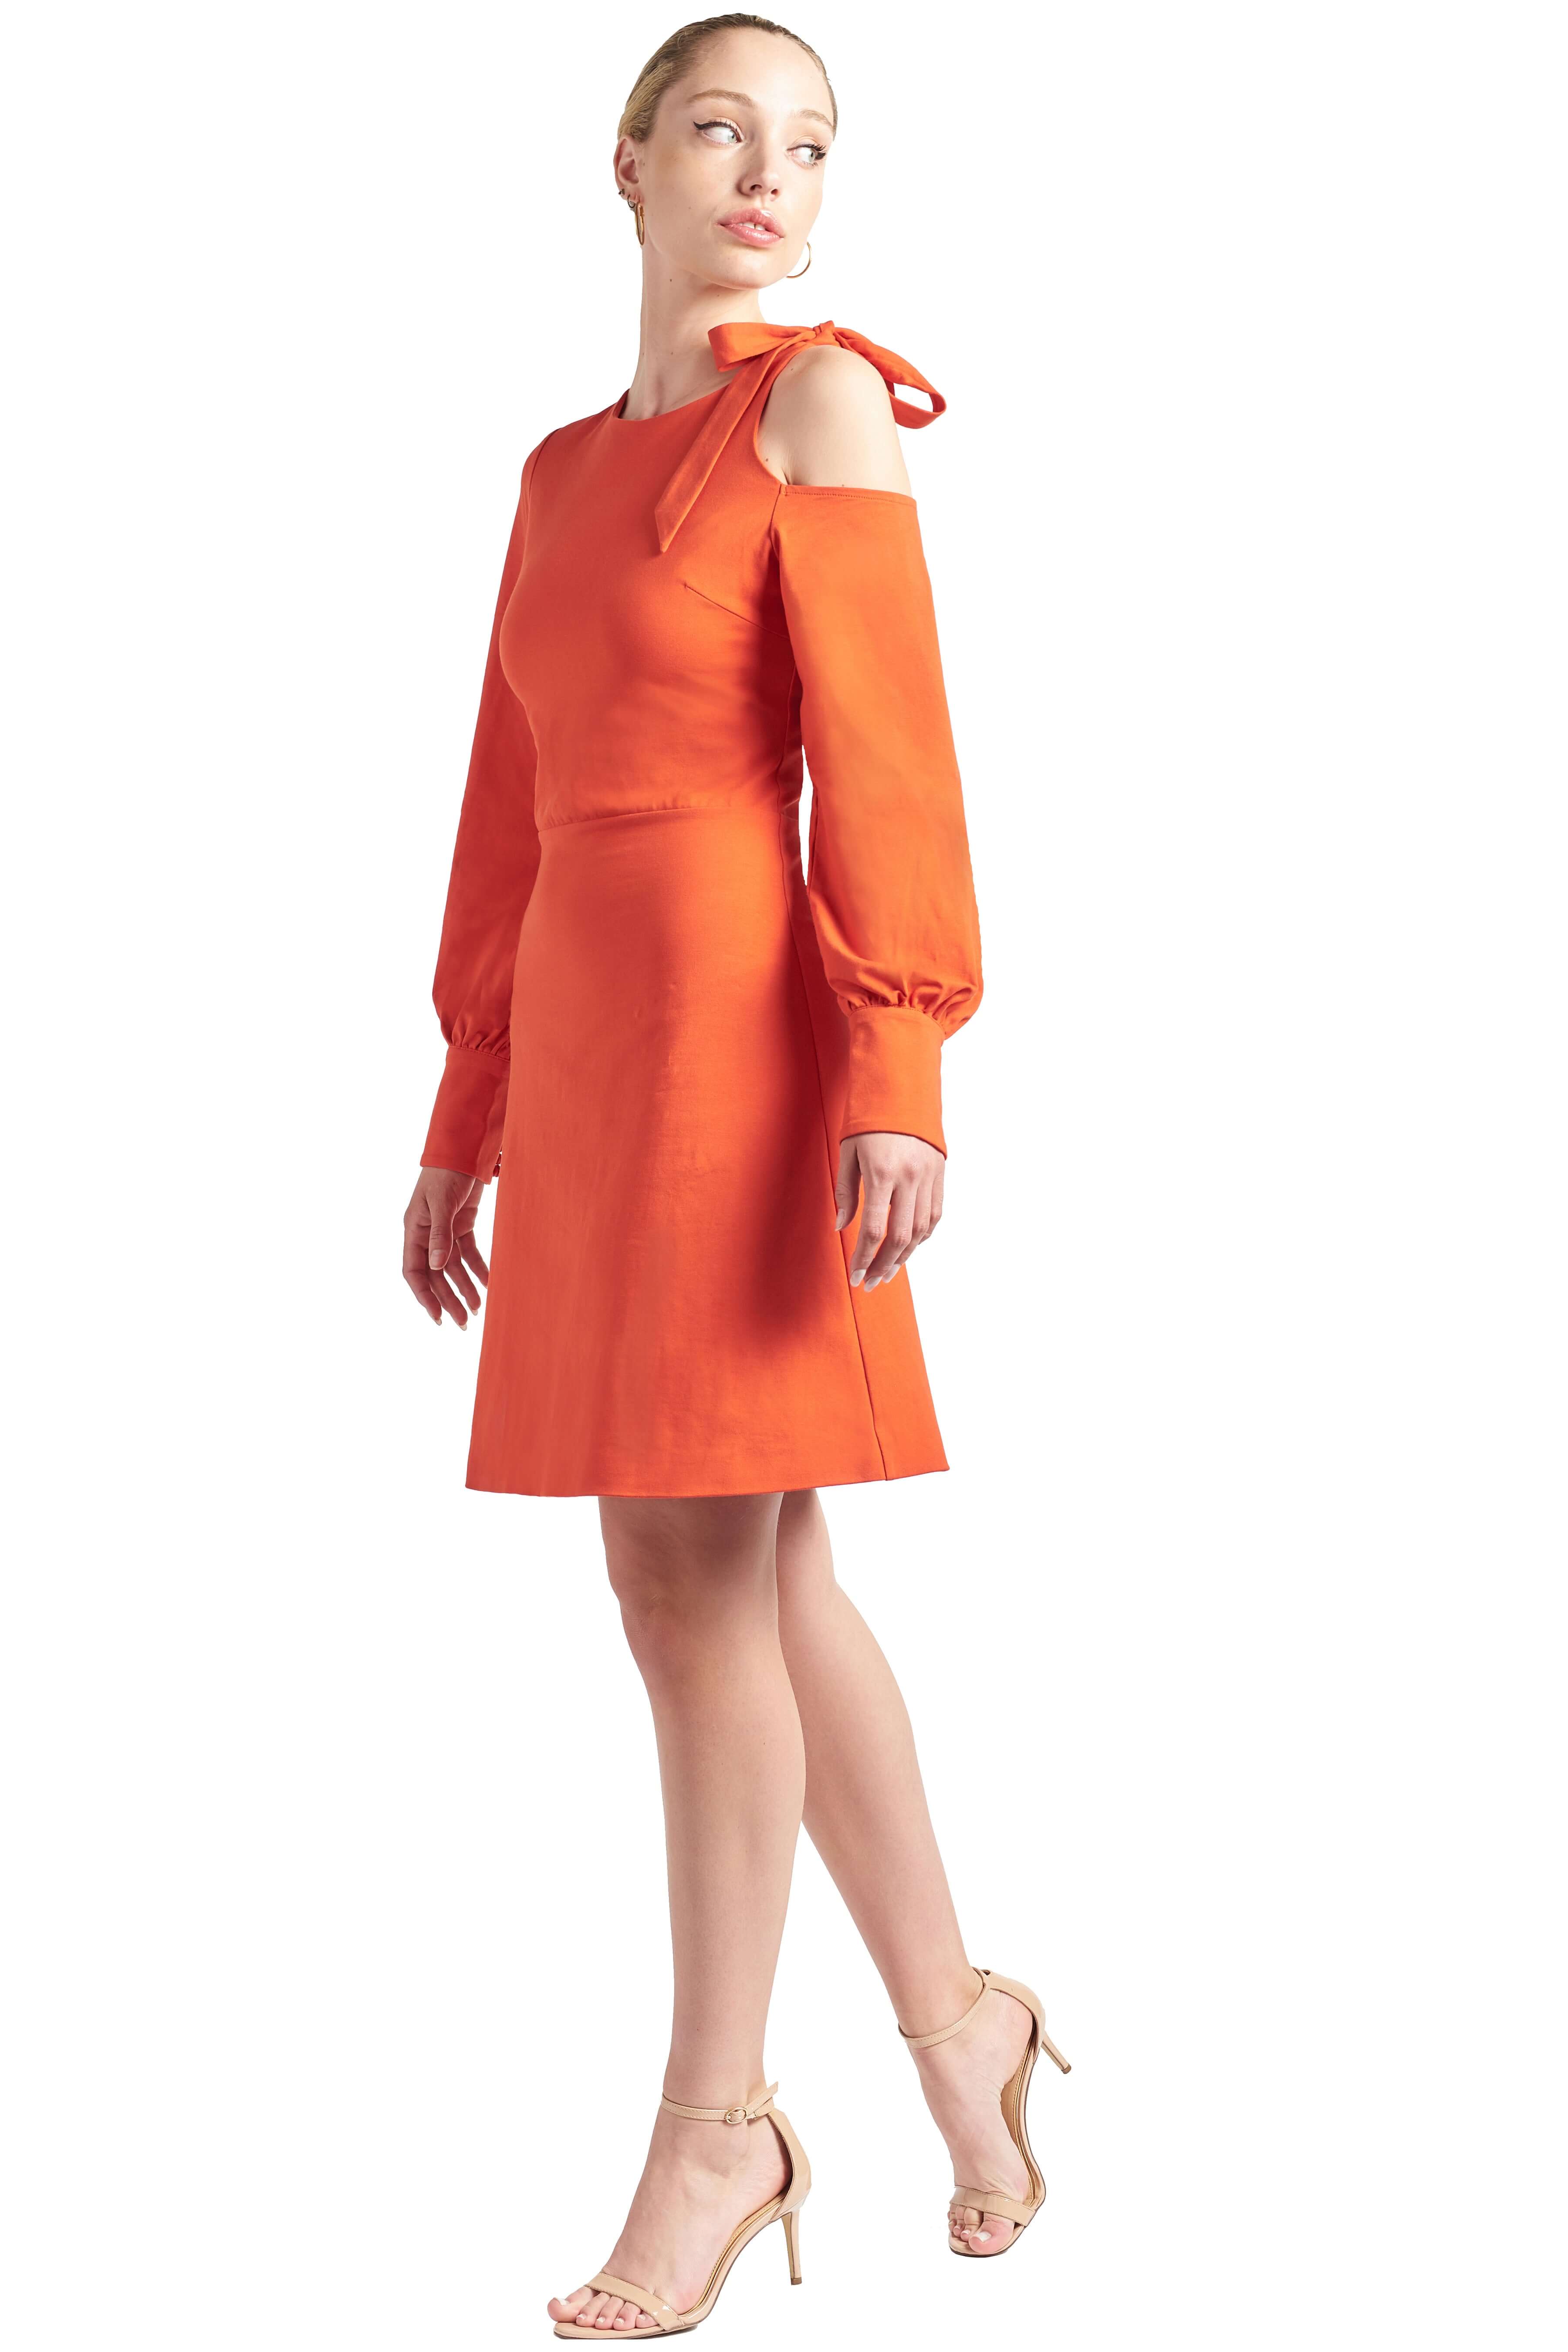 Model wearing fit & flare orange colored long sleeve dress with single shoulder cut-out and shoulder bow-tie.